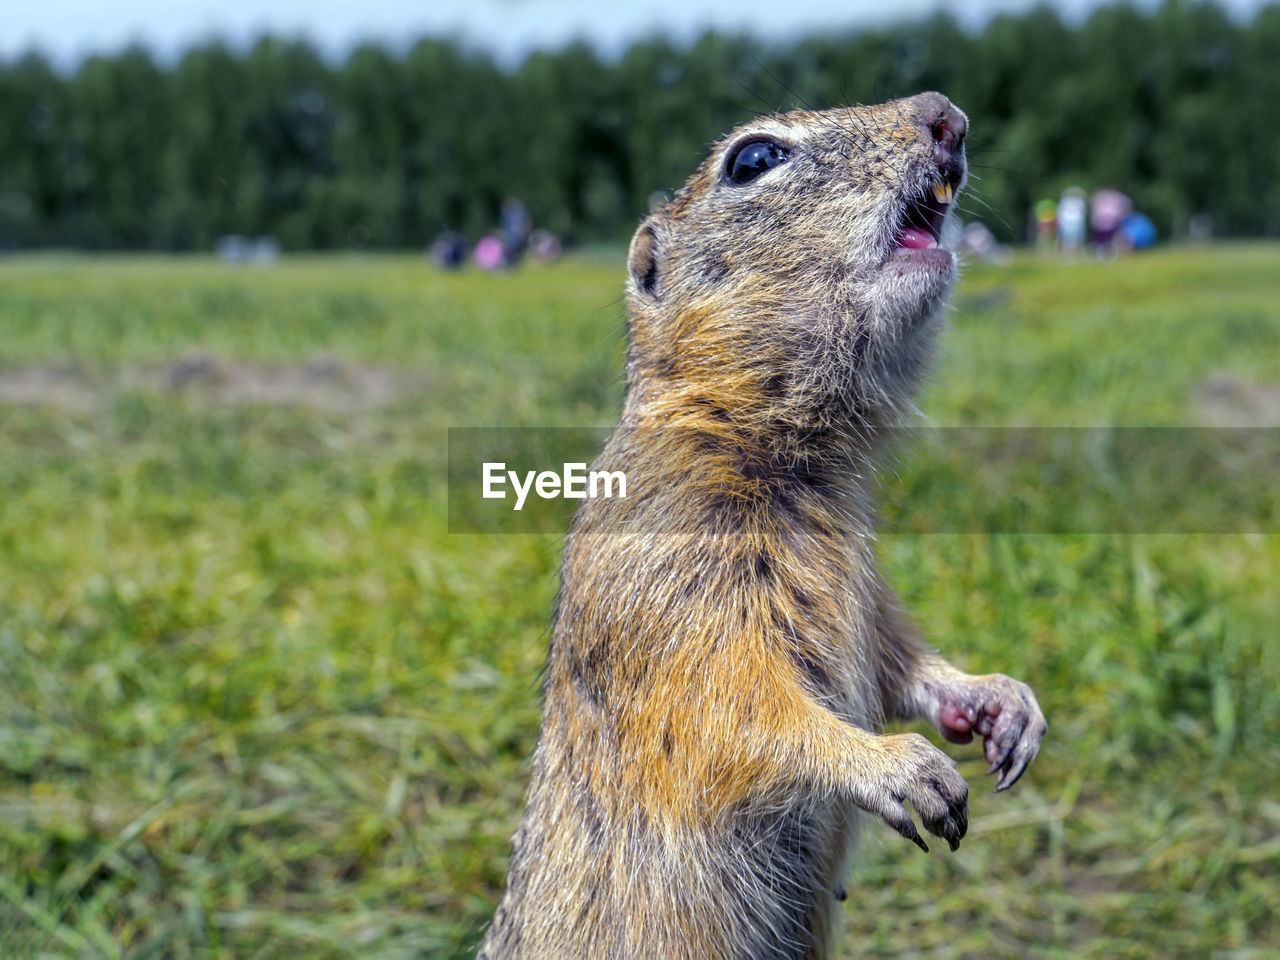 animal themes, animal, one animal, mammal, animal wildlife, wildlife, squirrel, no people, nature, grass, focus on foreground, rodent, animal body part, prairie dog, plant, outdoors, day, close-up, side view, looking